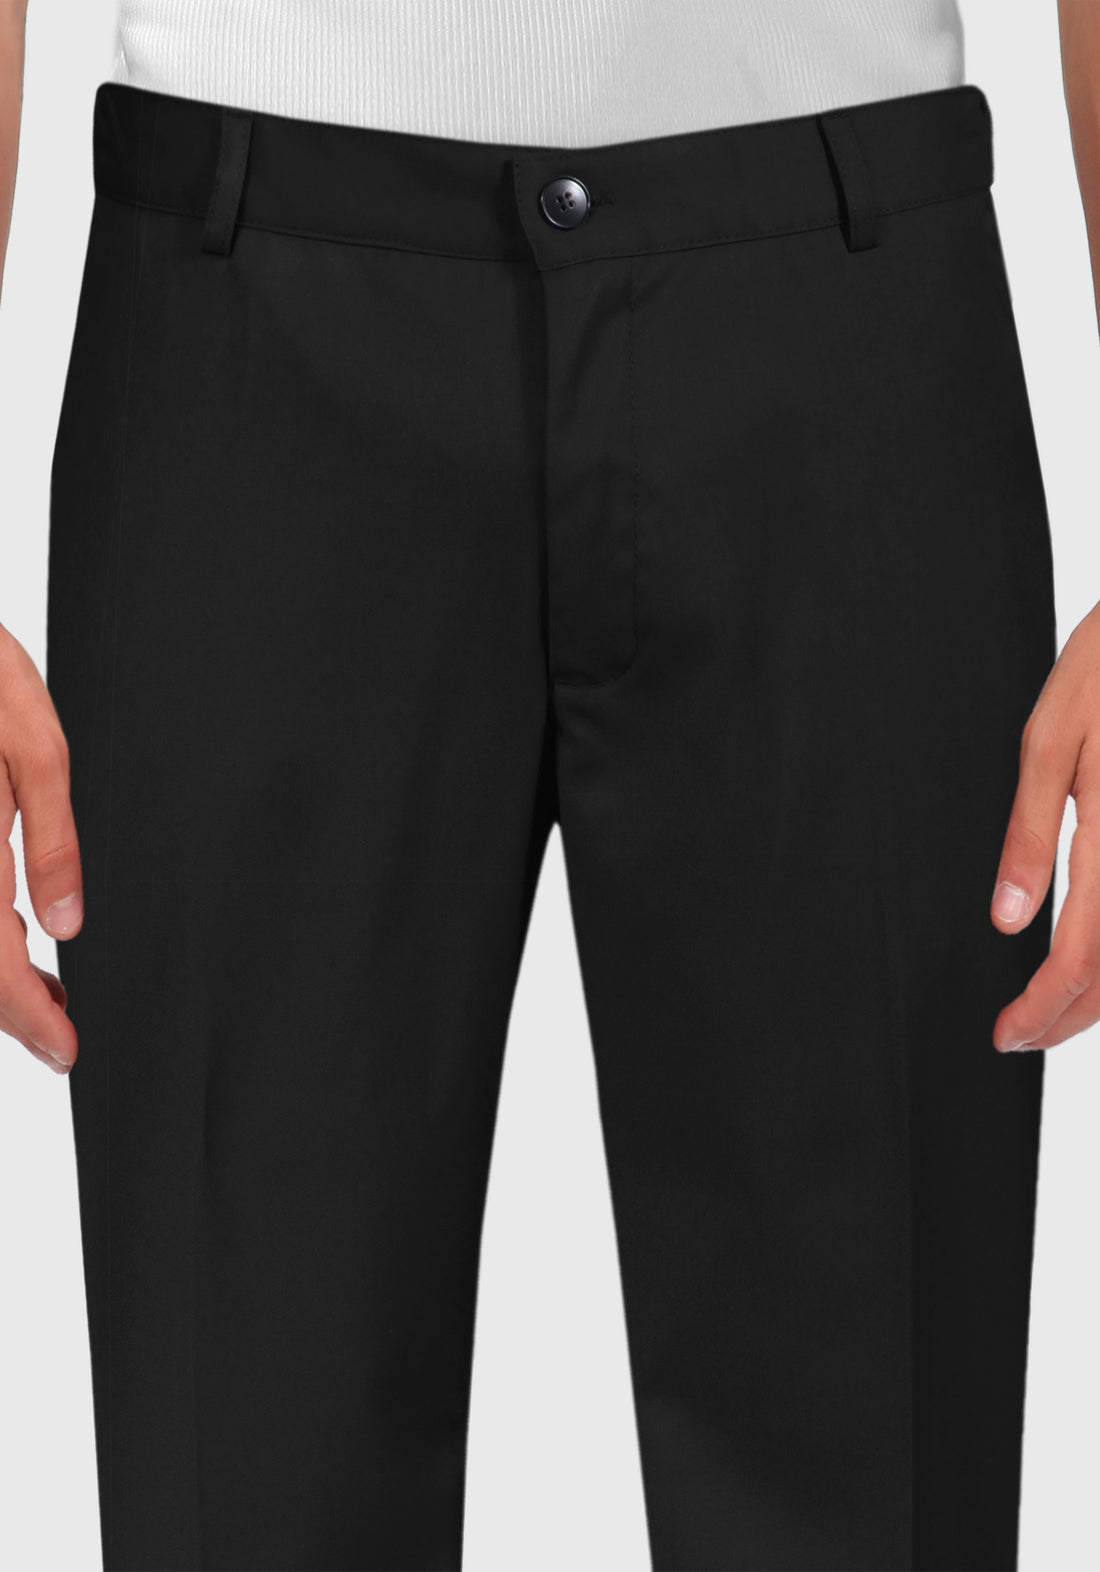 Half-breasted trousers dress with side elastics - Black